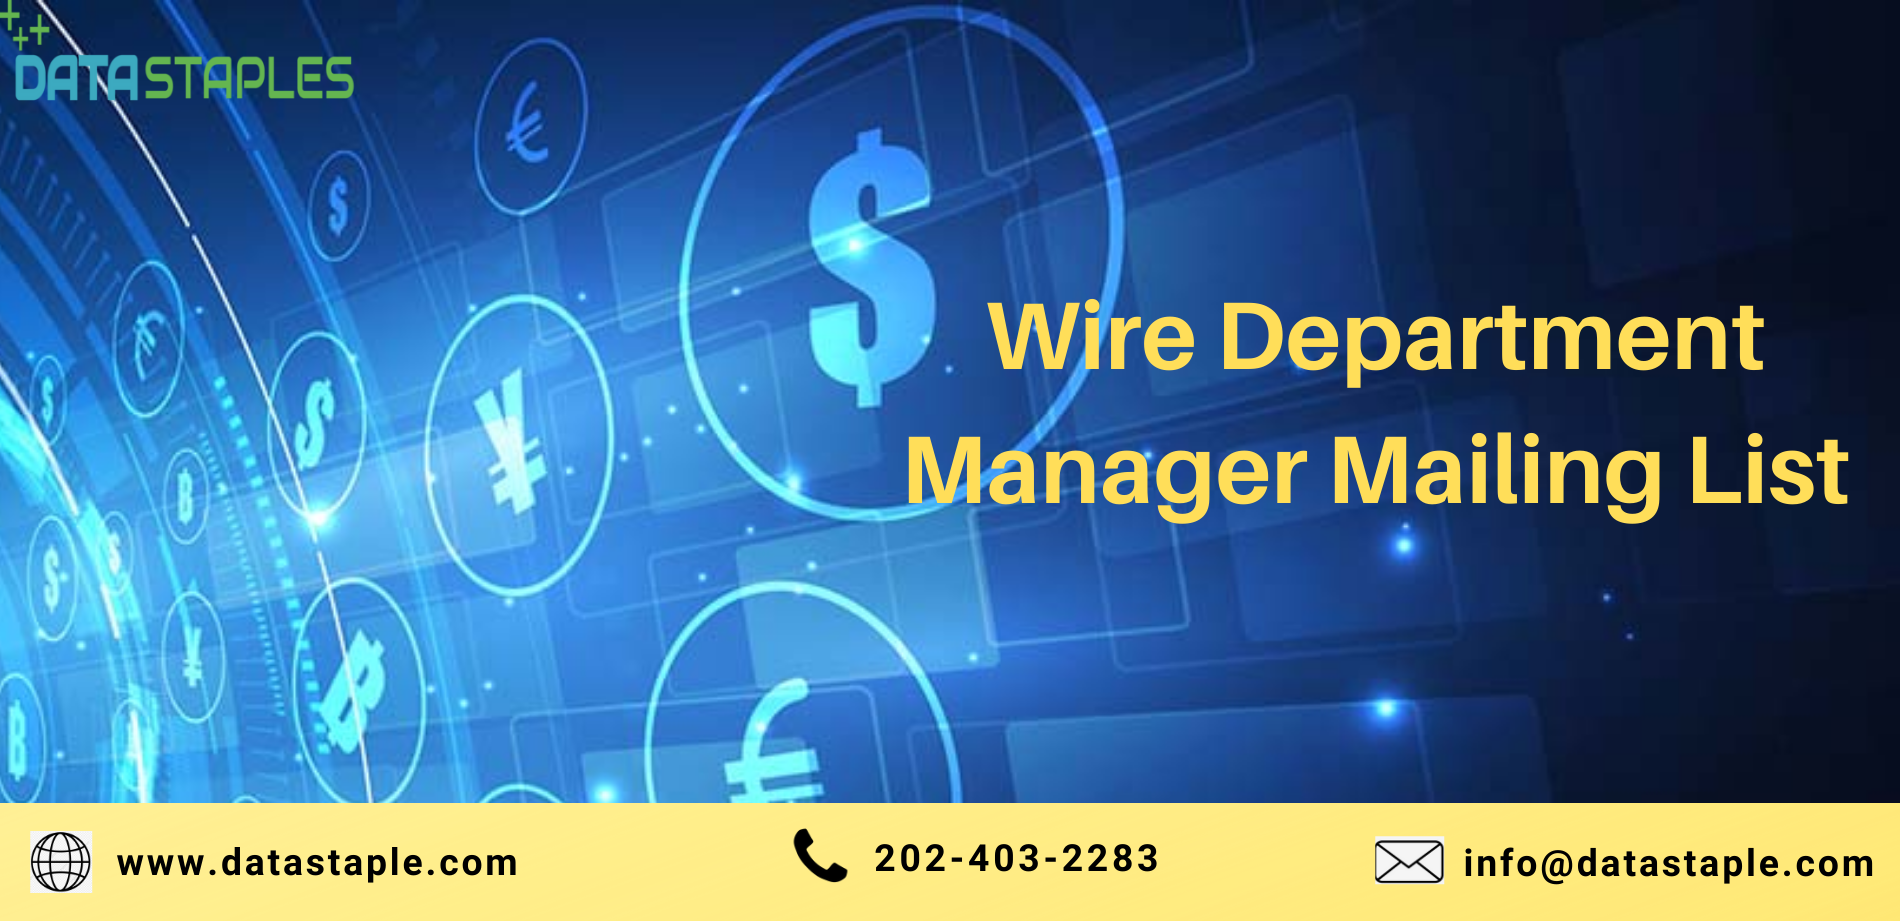 Wire Department Manager Mailing List | Datastaple